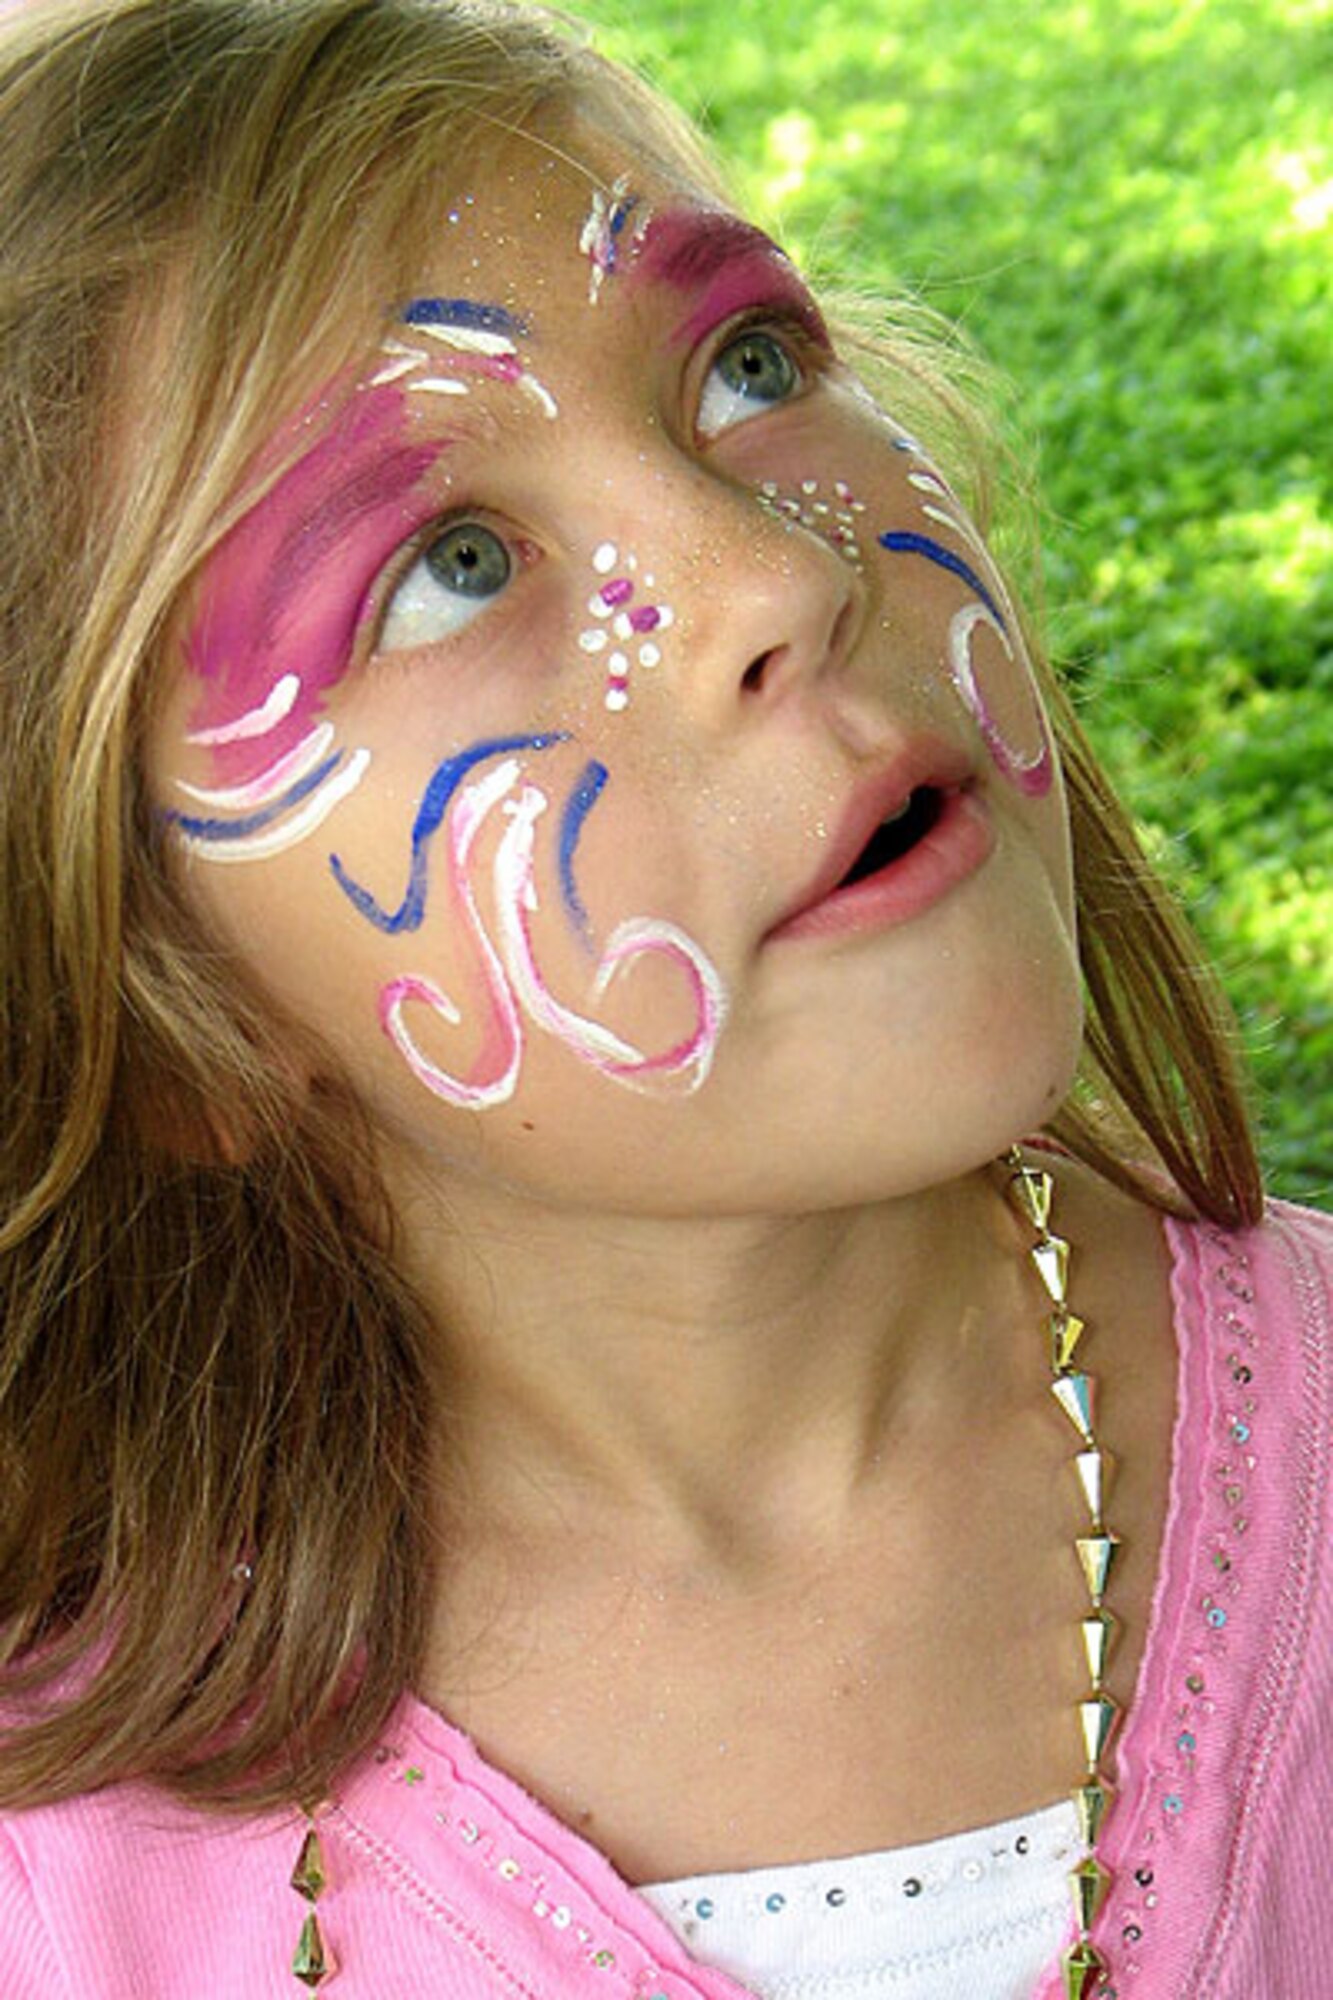 LAUGHLIN AIR FORCE BASE, Texas – Adriann Loftus displays her painted face at the 47th Flying Training Wing Friendship Chapel’s Renaissance Fair.  More than 400 people attended the event Sept. 6.  The festival featured a dunking booth, bounce castle and human chess match, among other attractions.  (U.S. Air Force photo by David Loftus.)